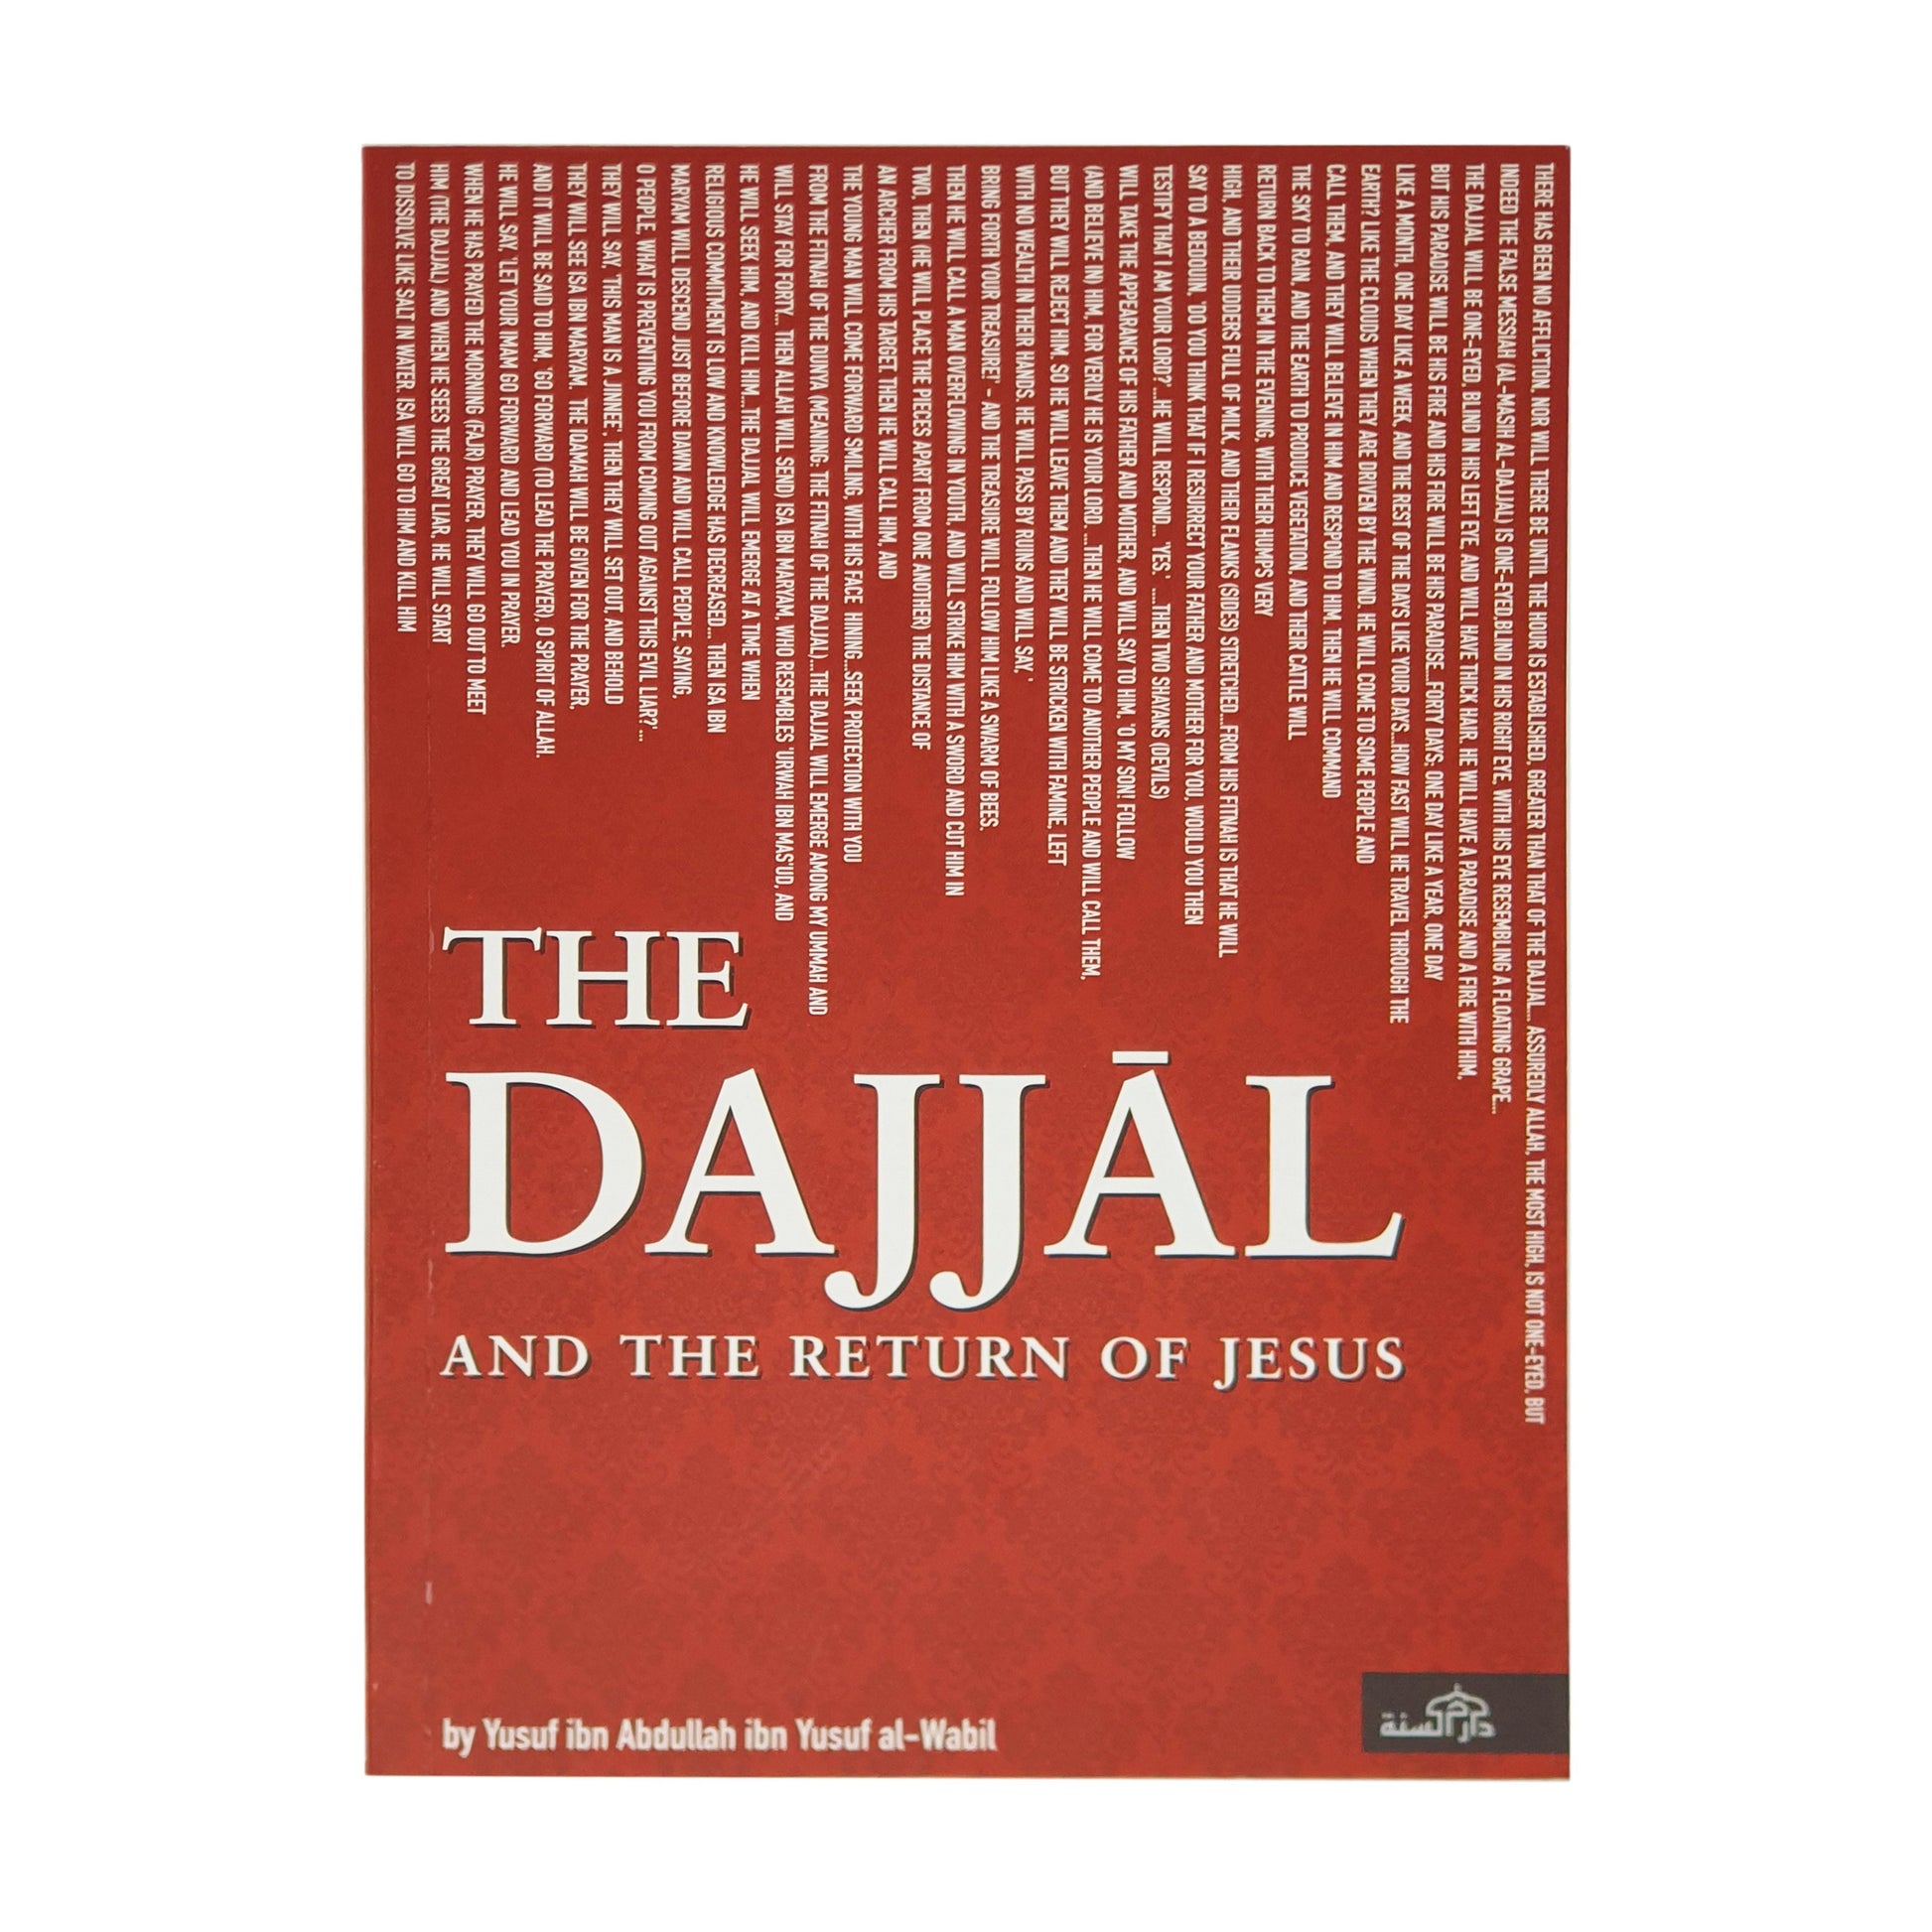 The Dajjal and the Return of Jesus